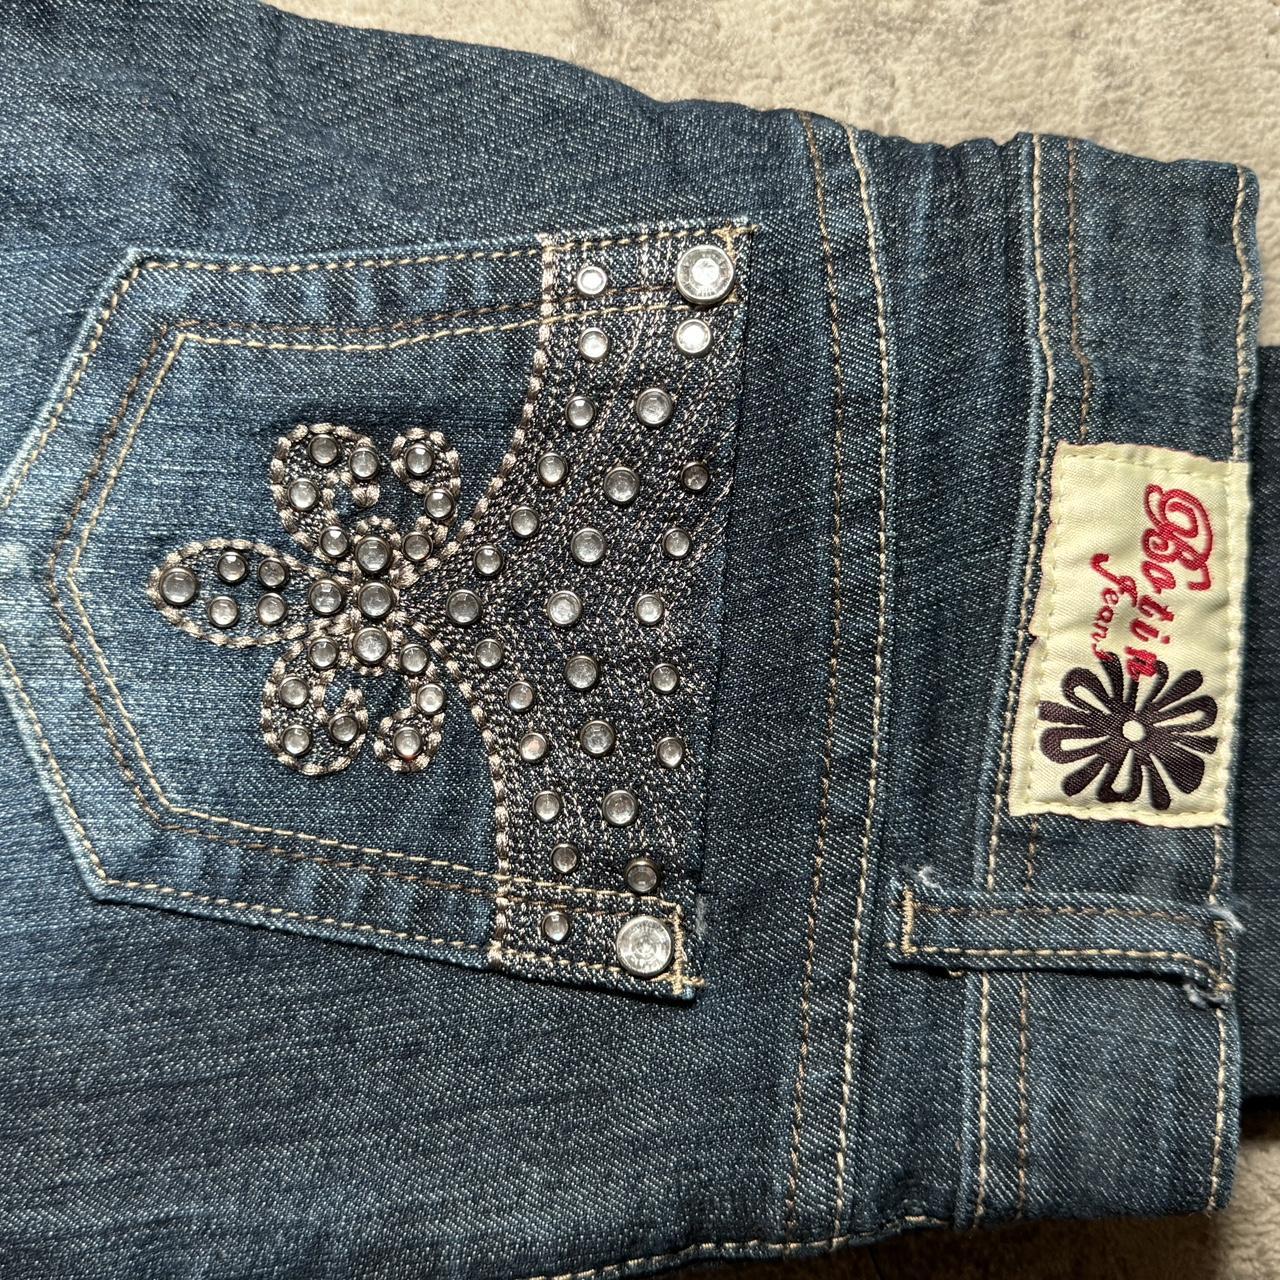 low rise jeans with lots of rhinestone details - Depop